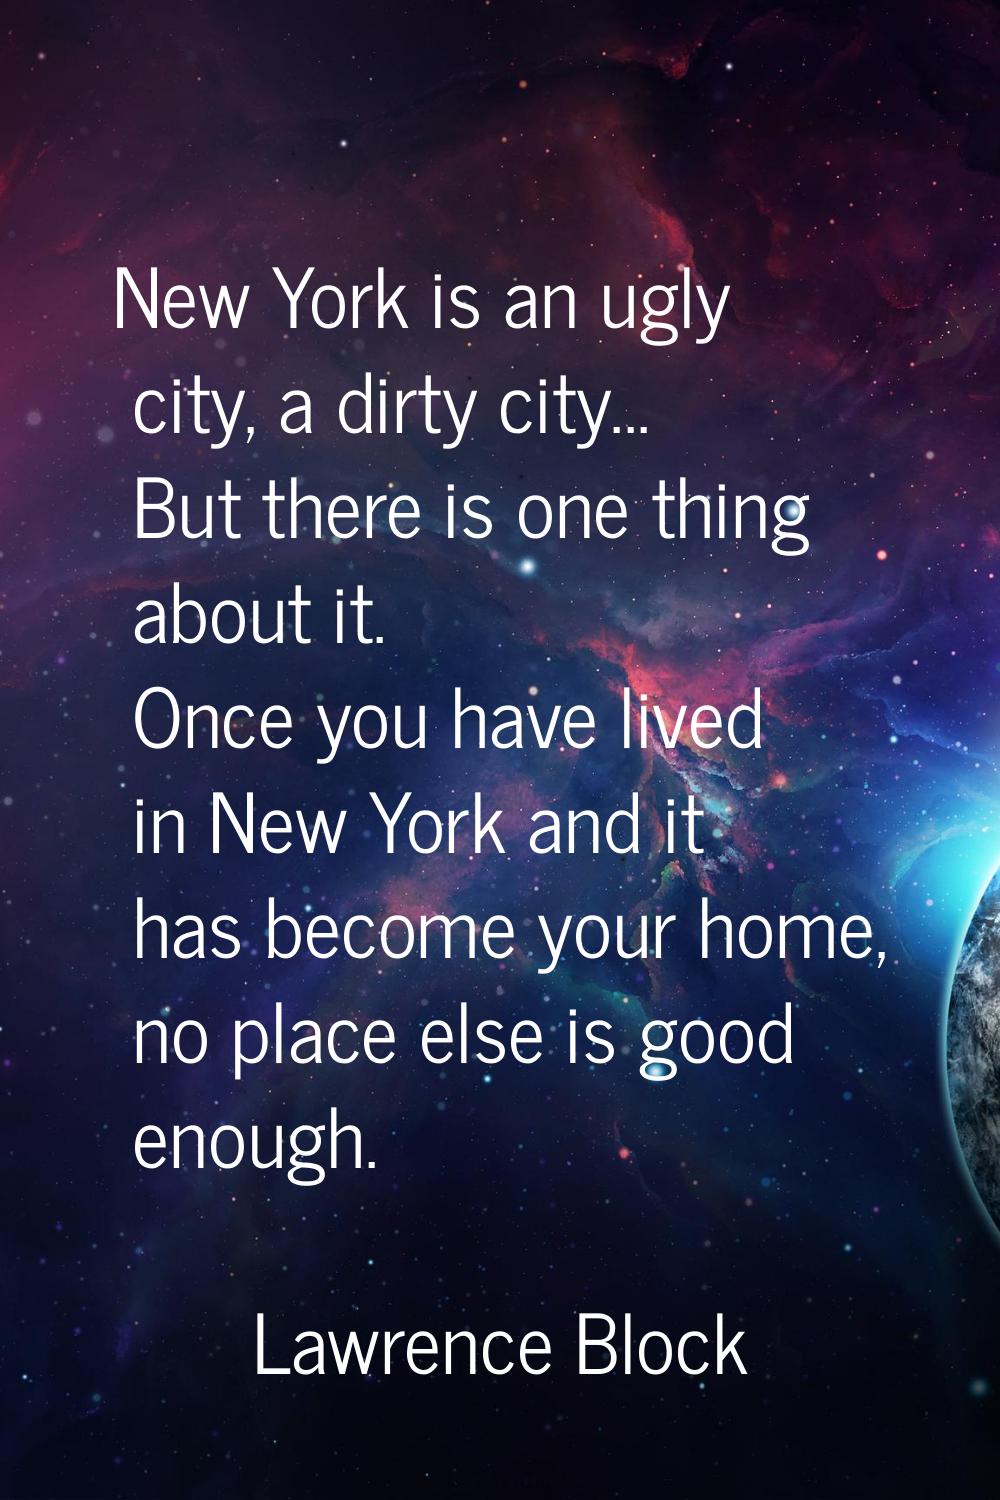 New York is an ugly city, a dirty city... But there is one thing about it. Once you have lived in N